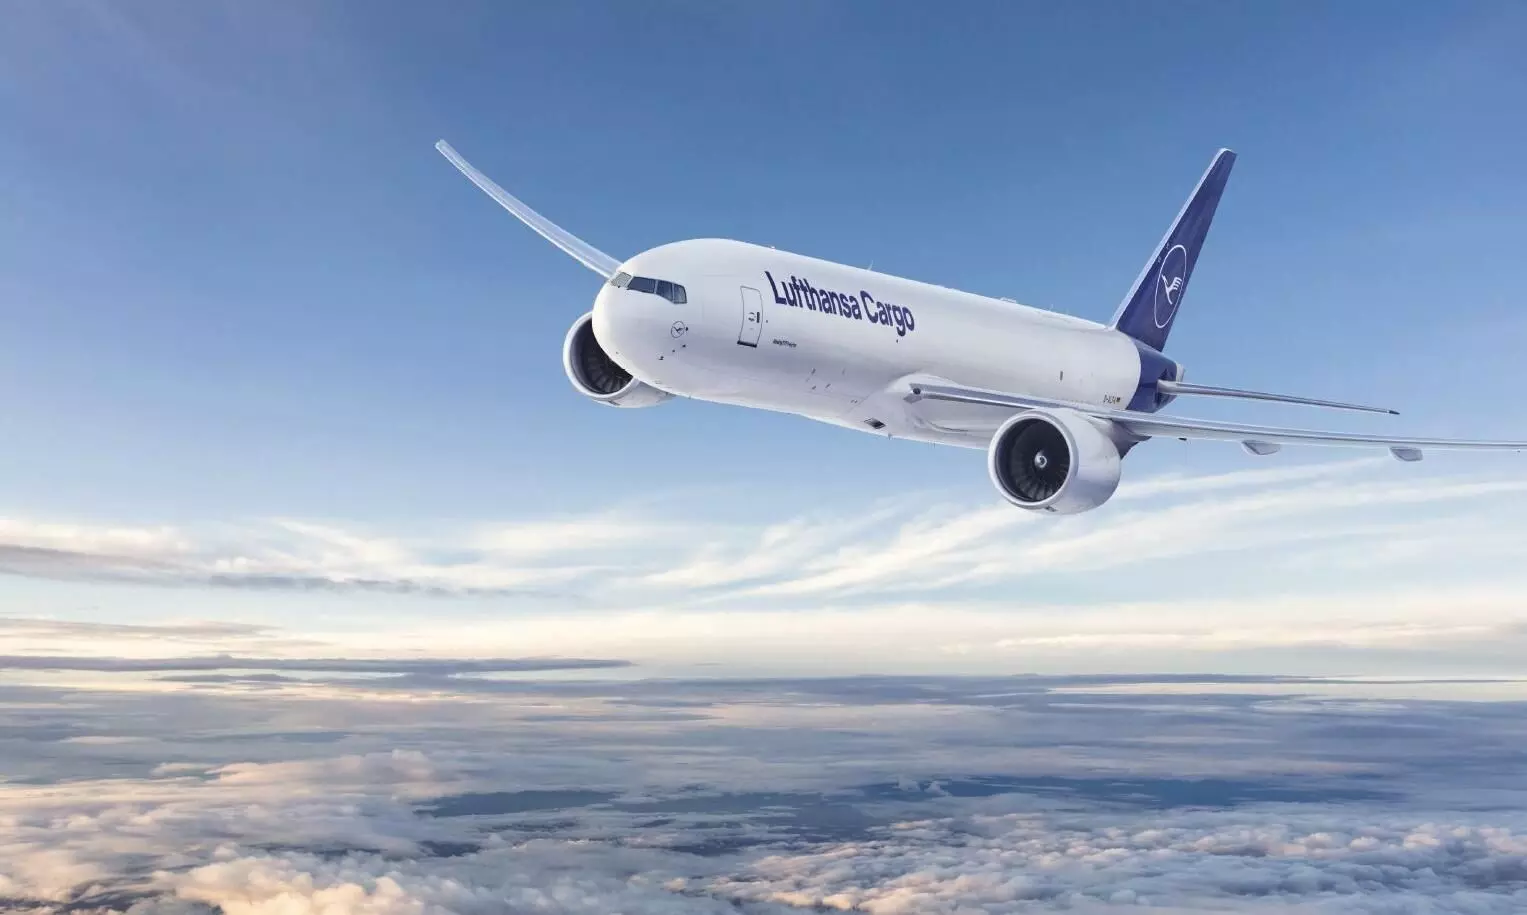 Lufthansa Cargo launches freighter service from Brussels to Chicago